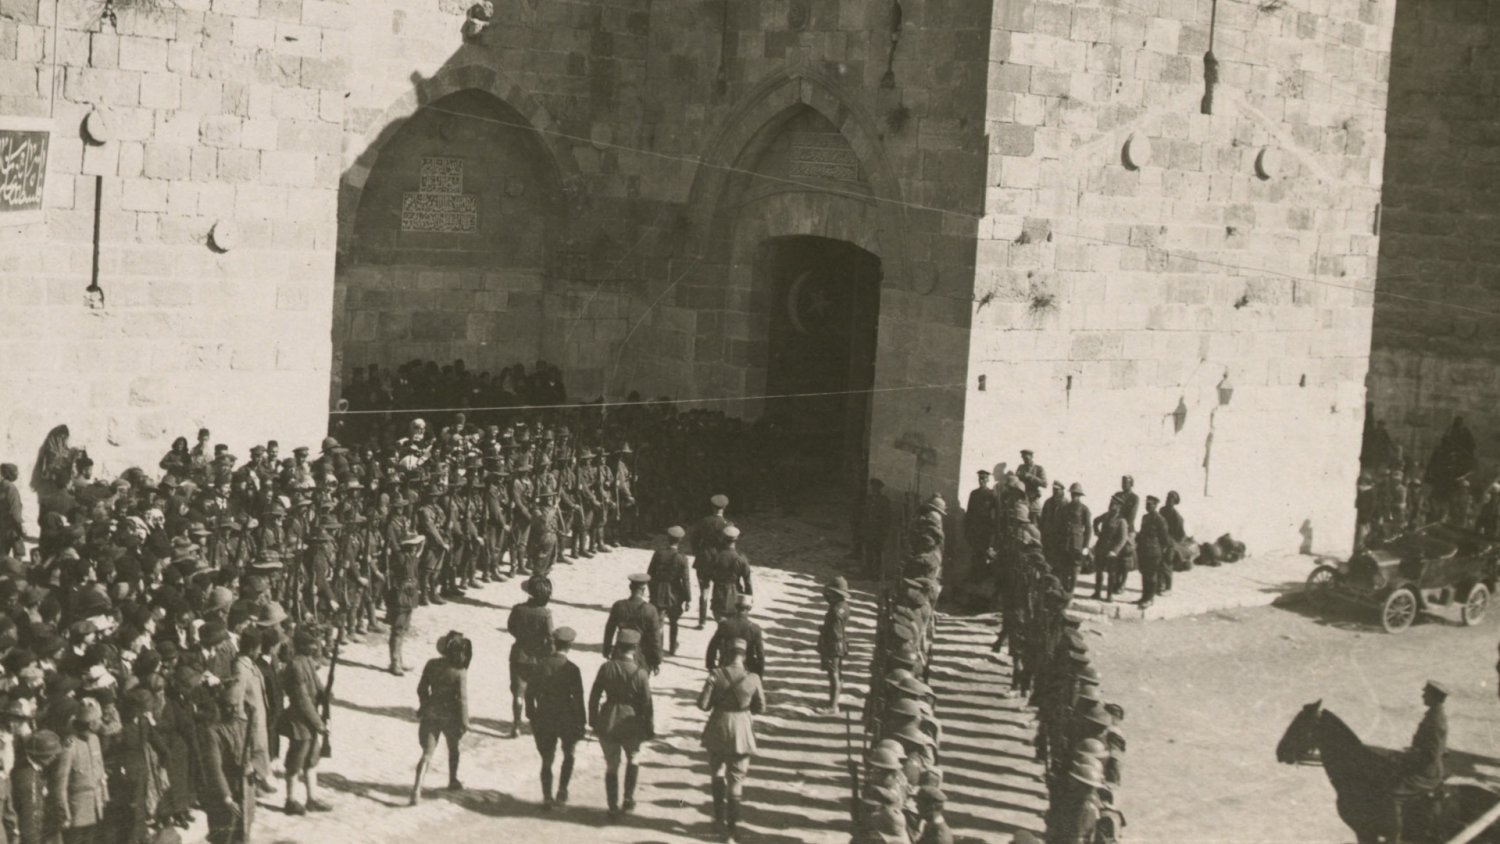 British General Edmund Allenby marched through the Old City’s Jaffa Gate on December 11, 1917